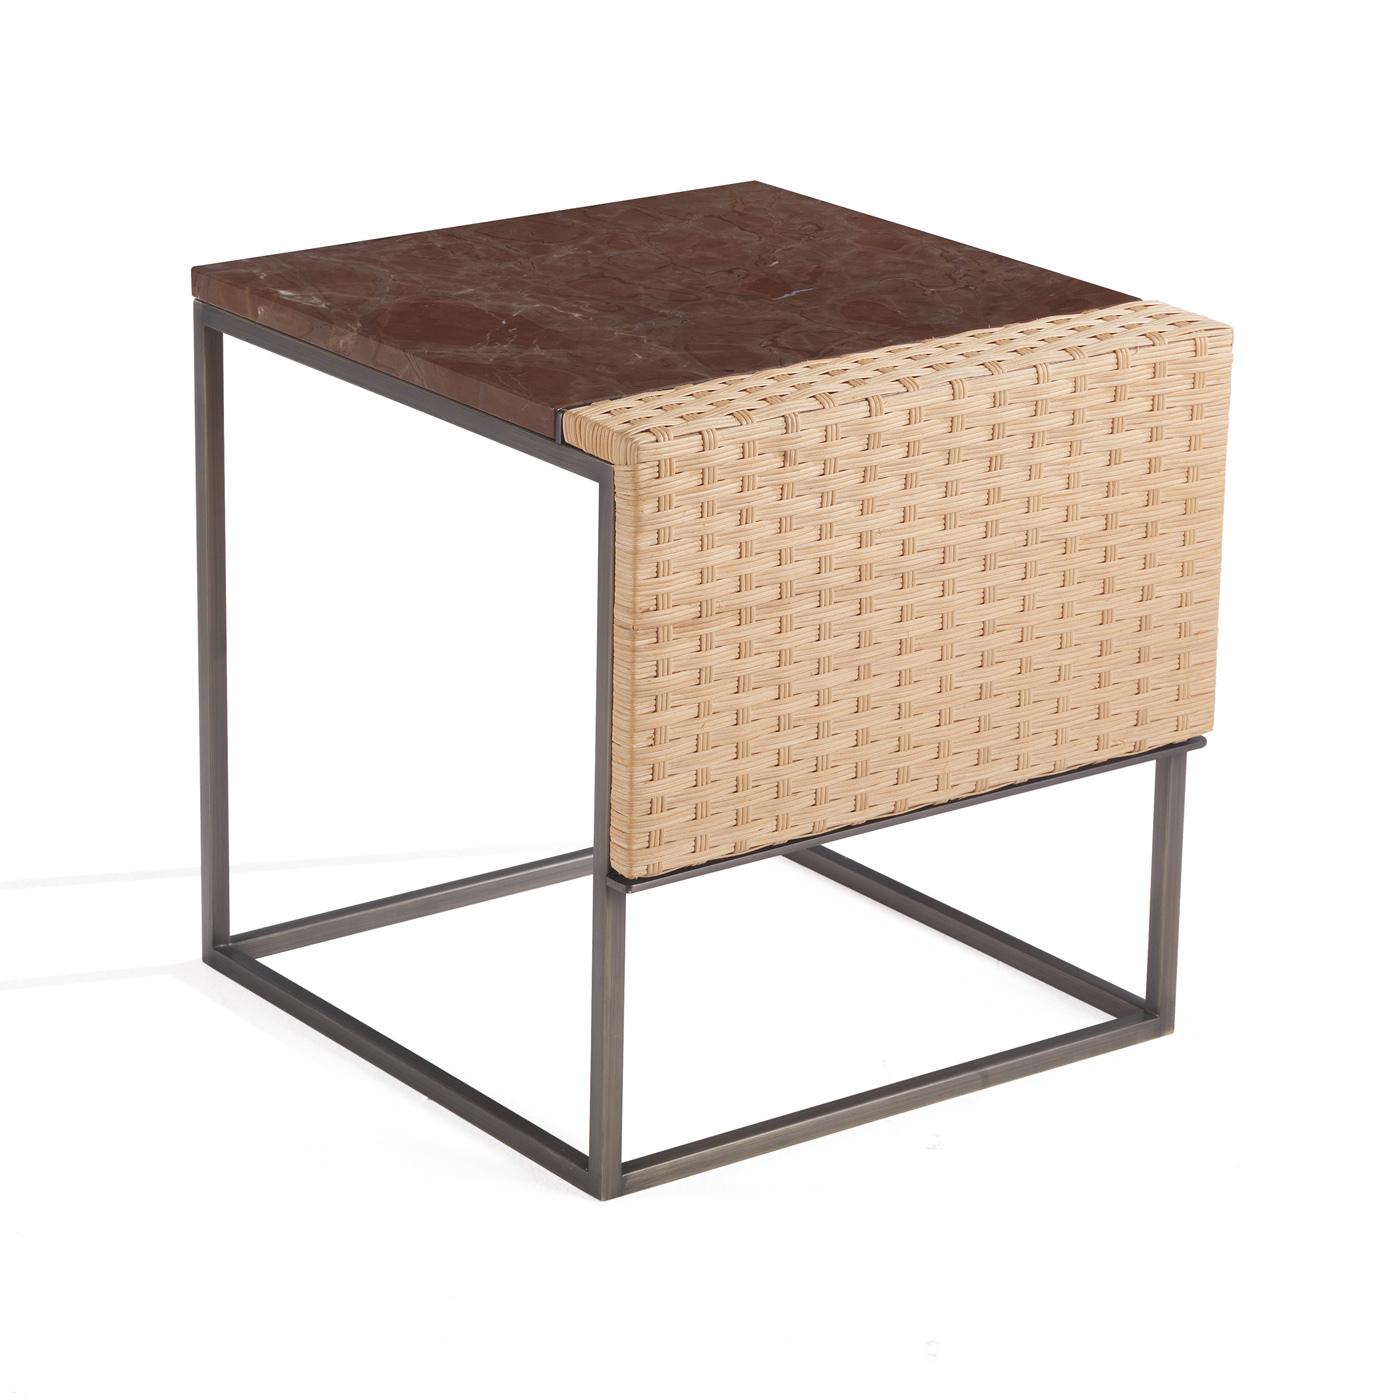 This side table will be a unique and splendid addition to a modern decor. A captivating interplay of refined materials and textures, it is composed of a cubic structure made of brushed brass, covered at its top with a stunning piece of red